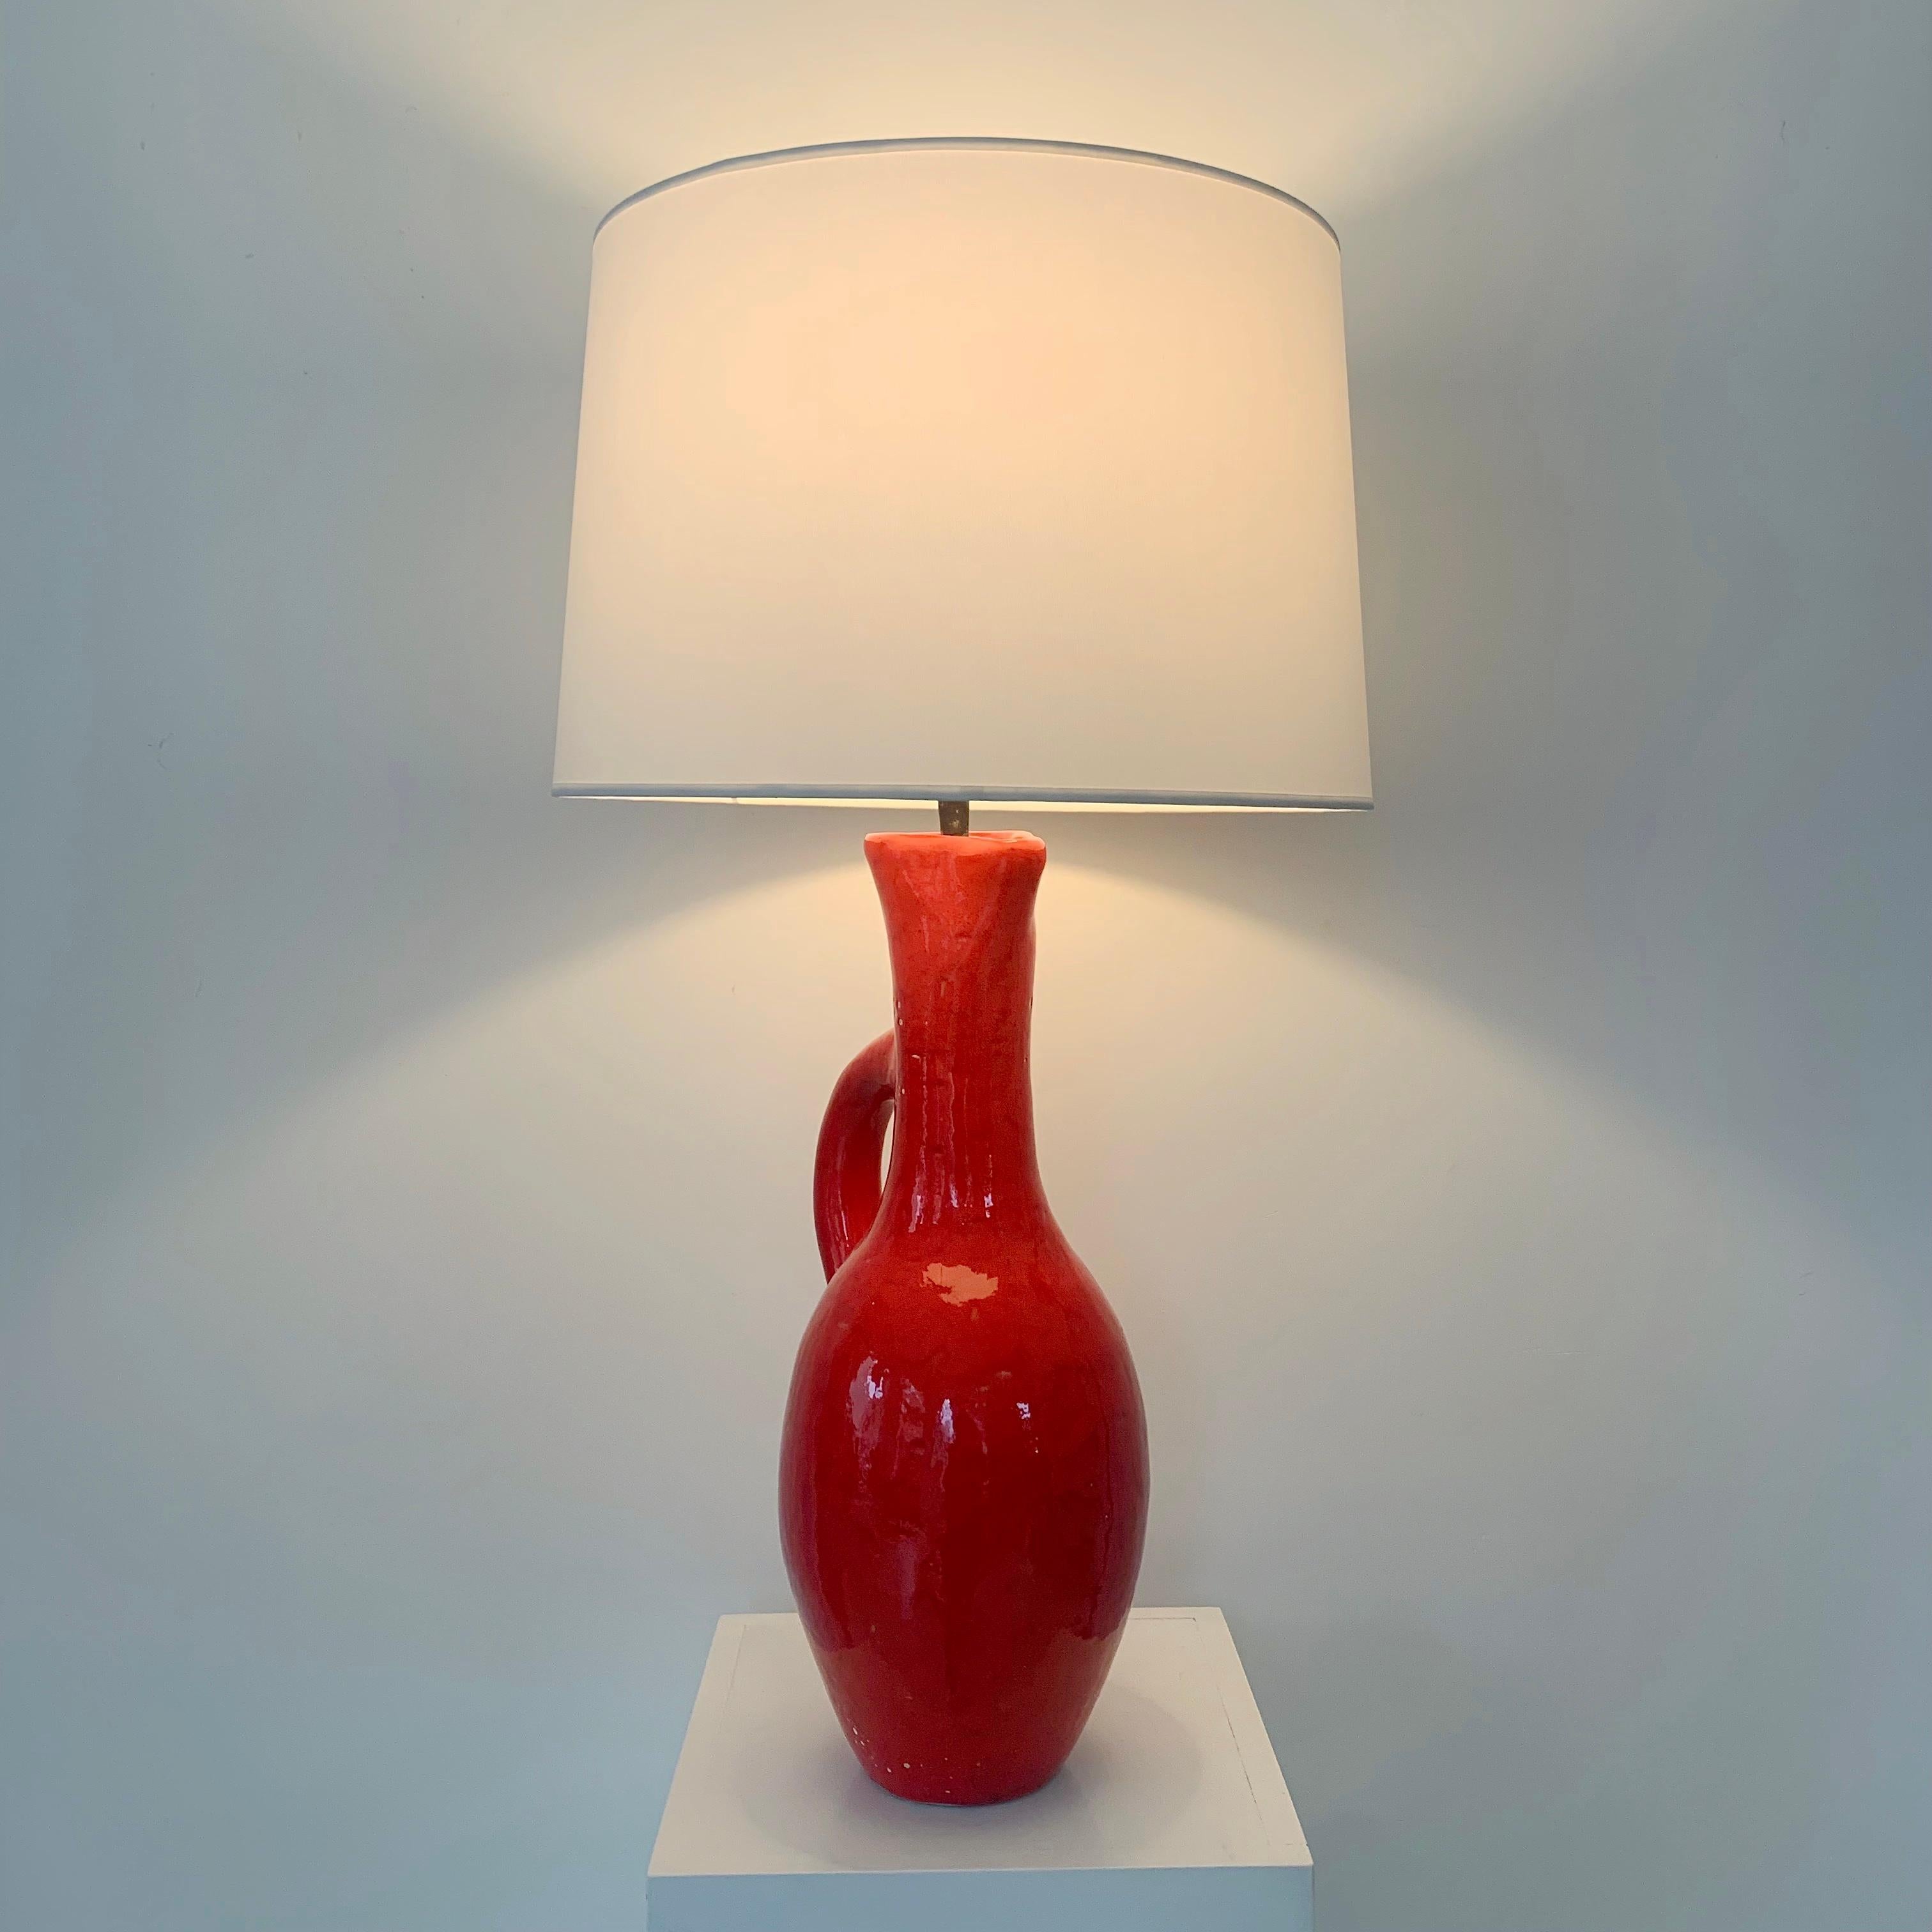 Les Archanges/Gilbert Valentin Large Signed Table Lamp, 1950s, Vallauris. 4